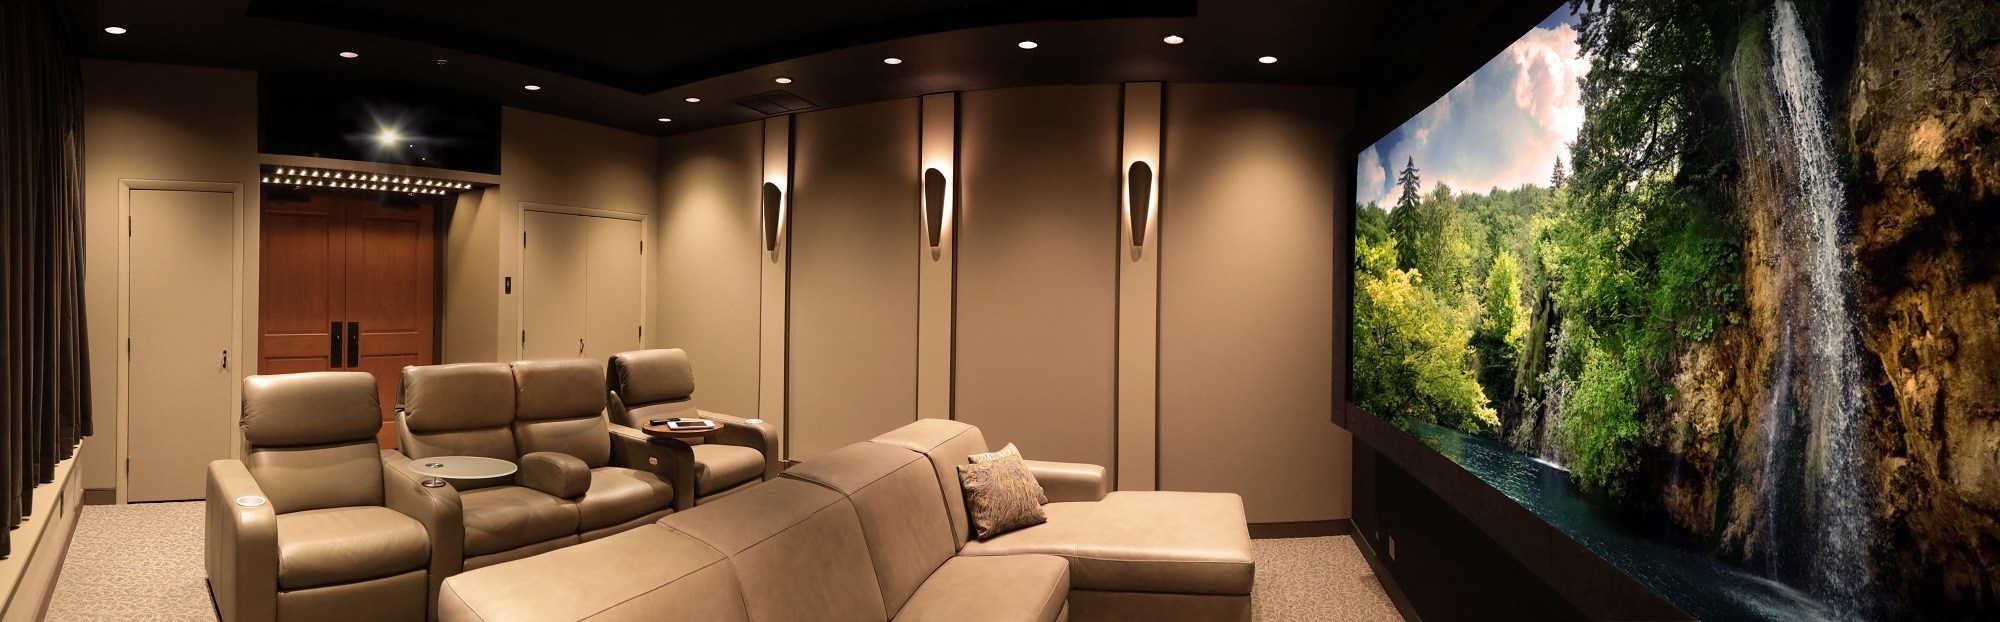 JBL Synthesis home theater